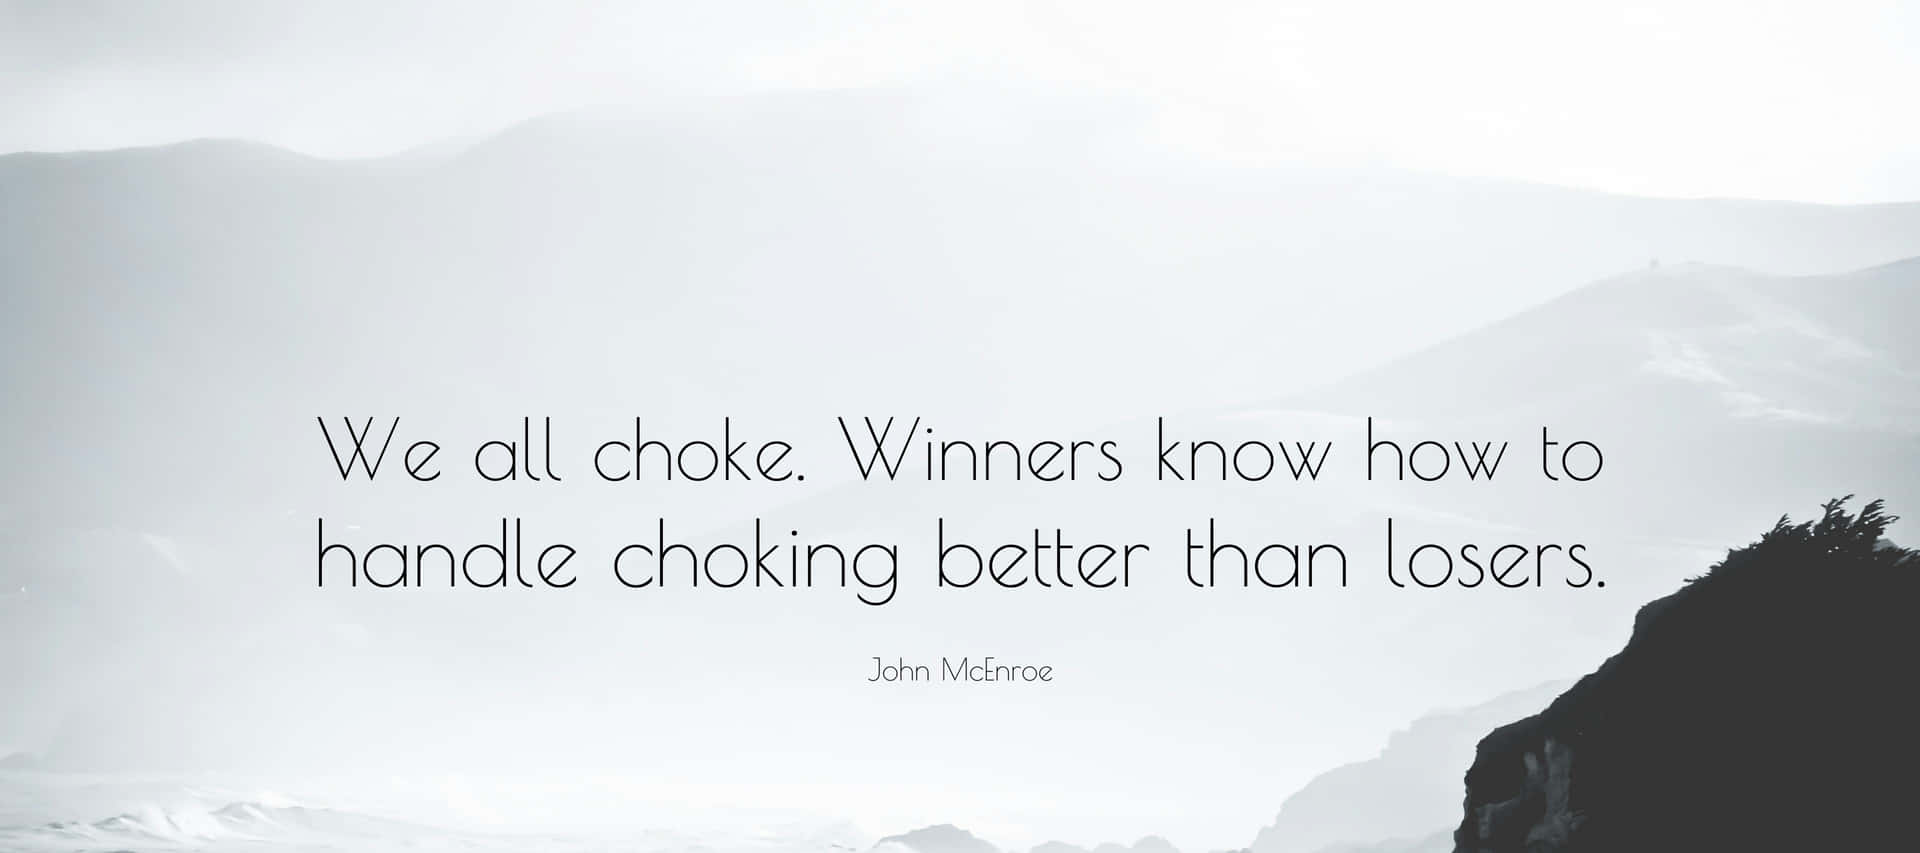 A Quote That Says We All Choose Winners How To Handle Chugging Better Than Losers